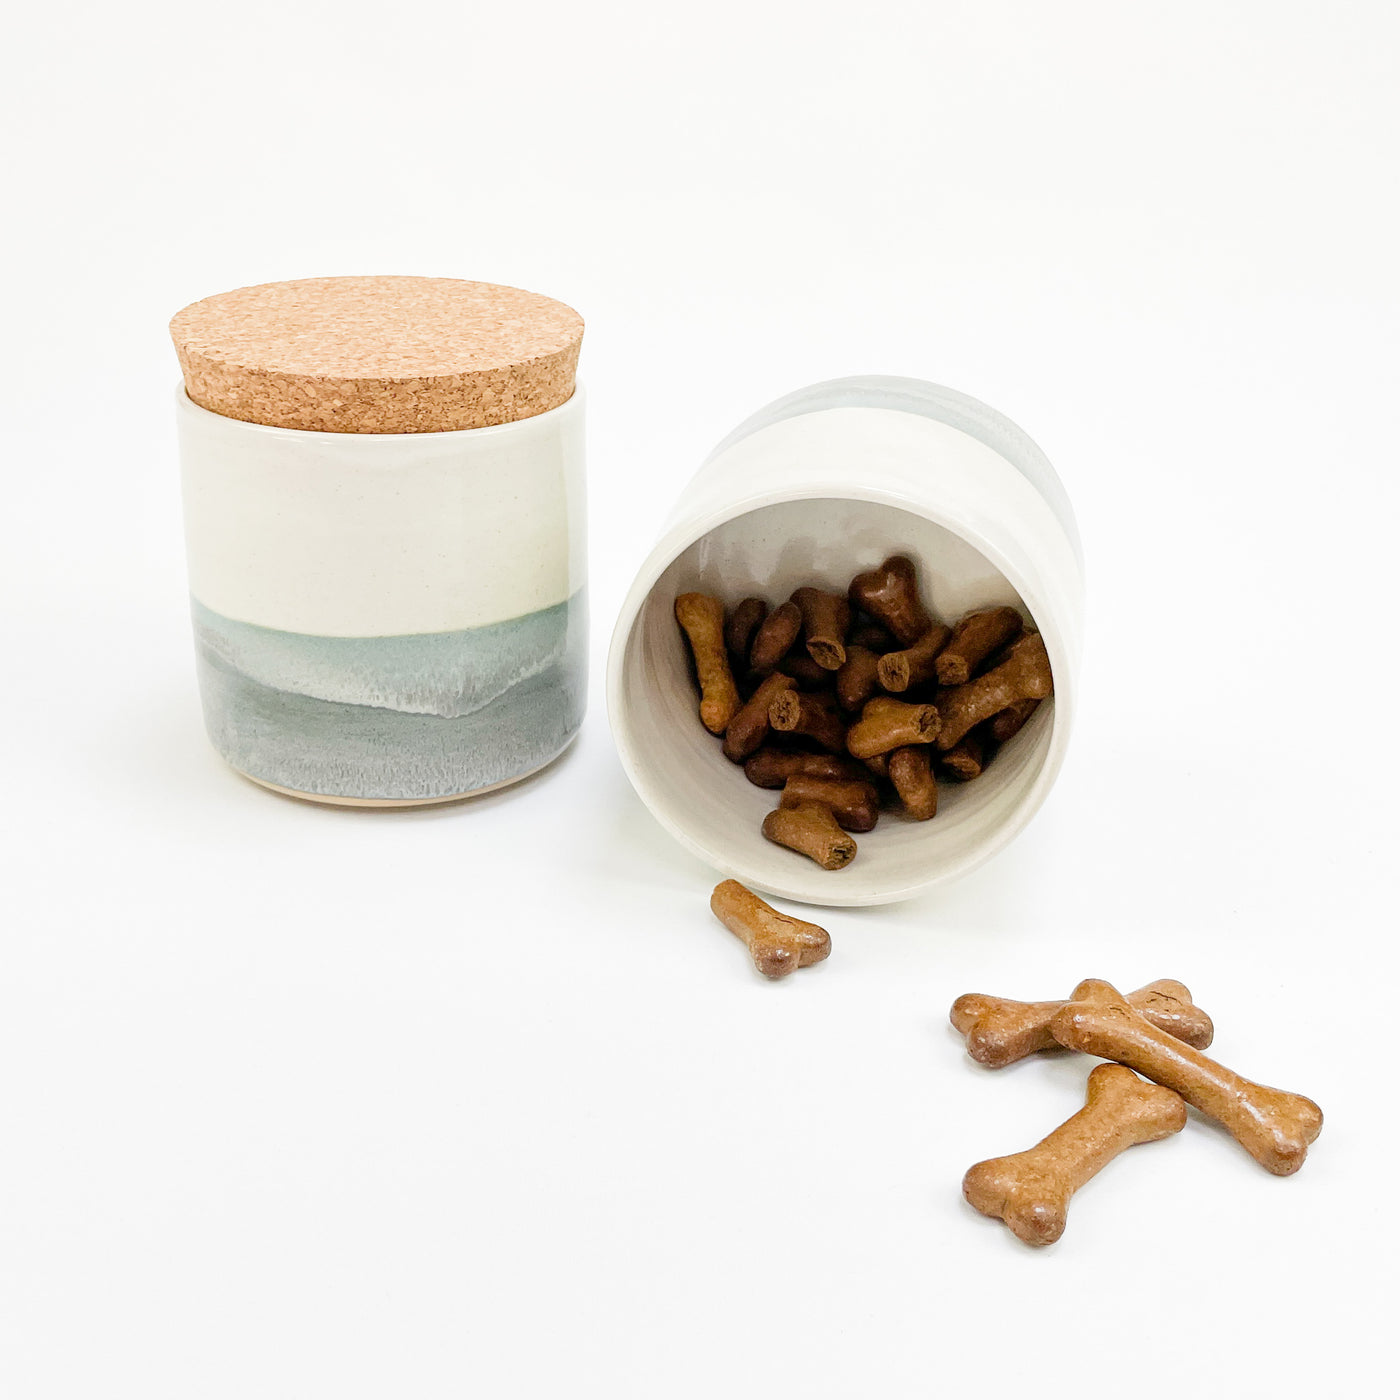 Hand-thrown ceramic treat jar ideal for storing gravy bones and other treats.